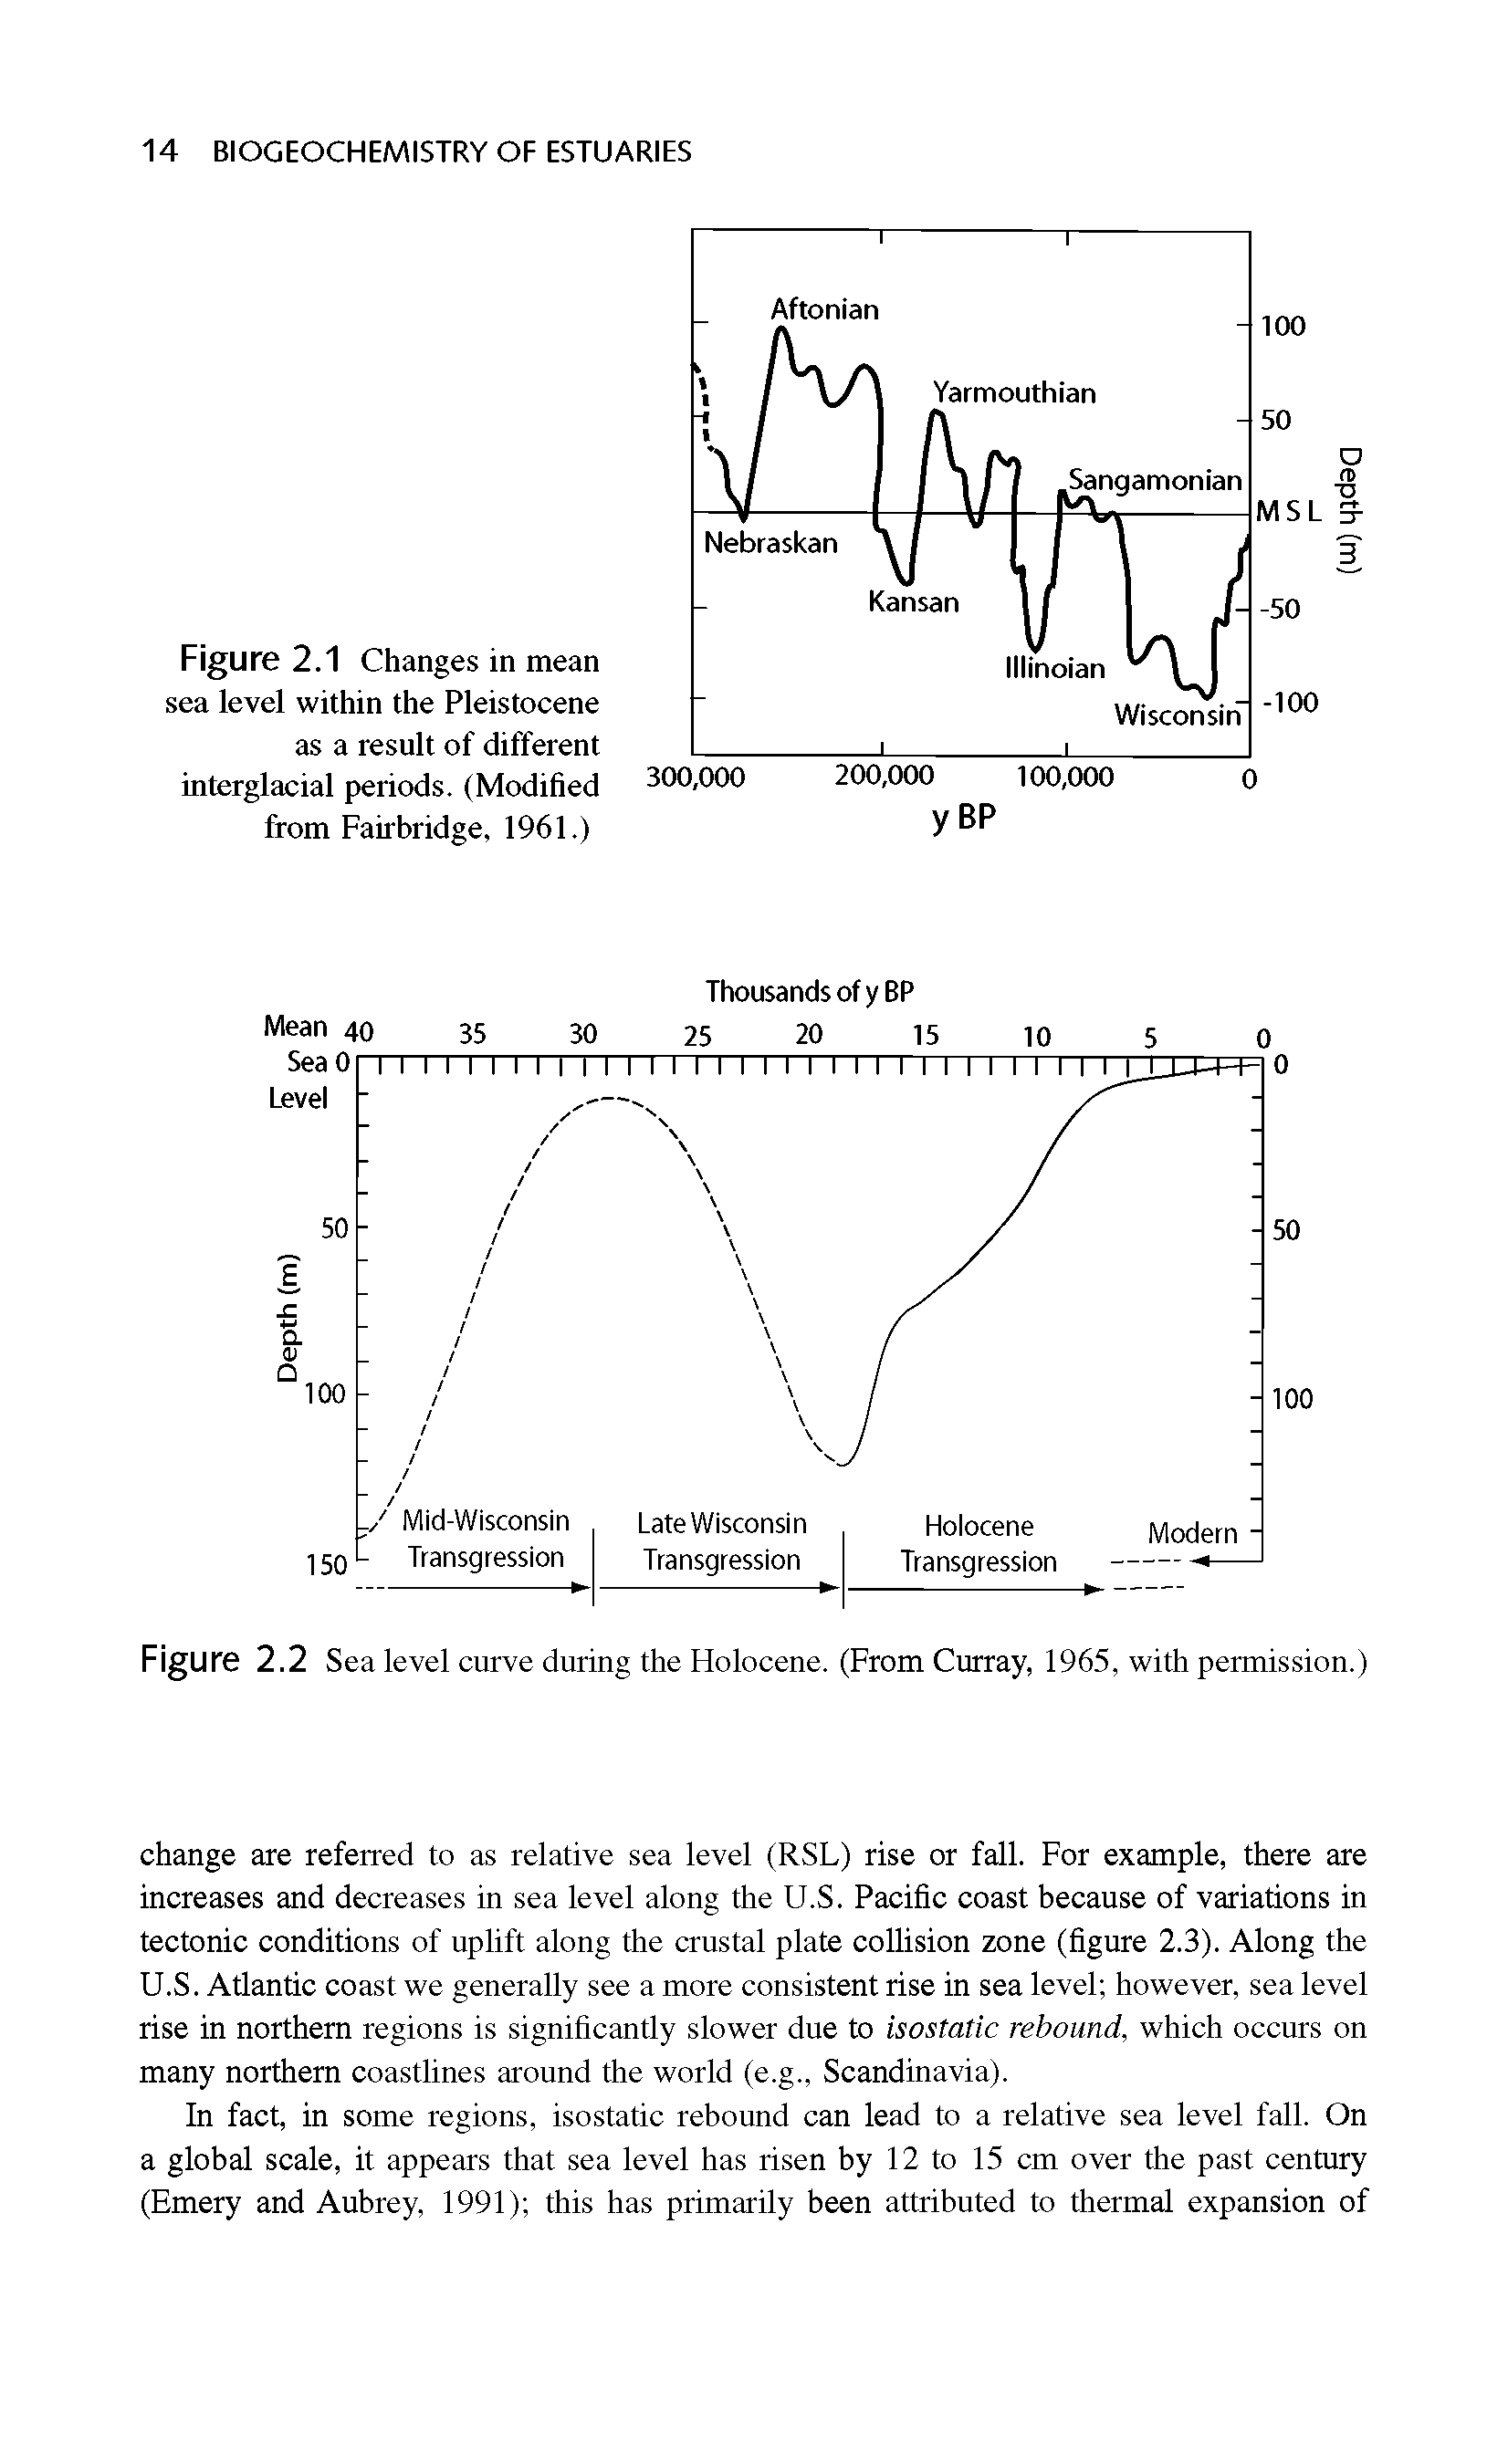 Figure 2.1 Changes in mean sea level within the Pleistocene as a result of different interglacial periods. (Modified from Fairbridge, 1961.)...